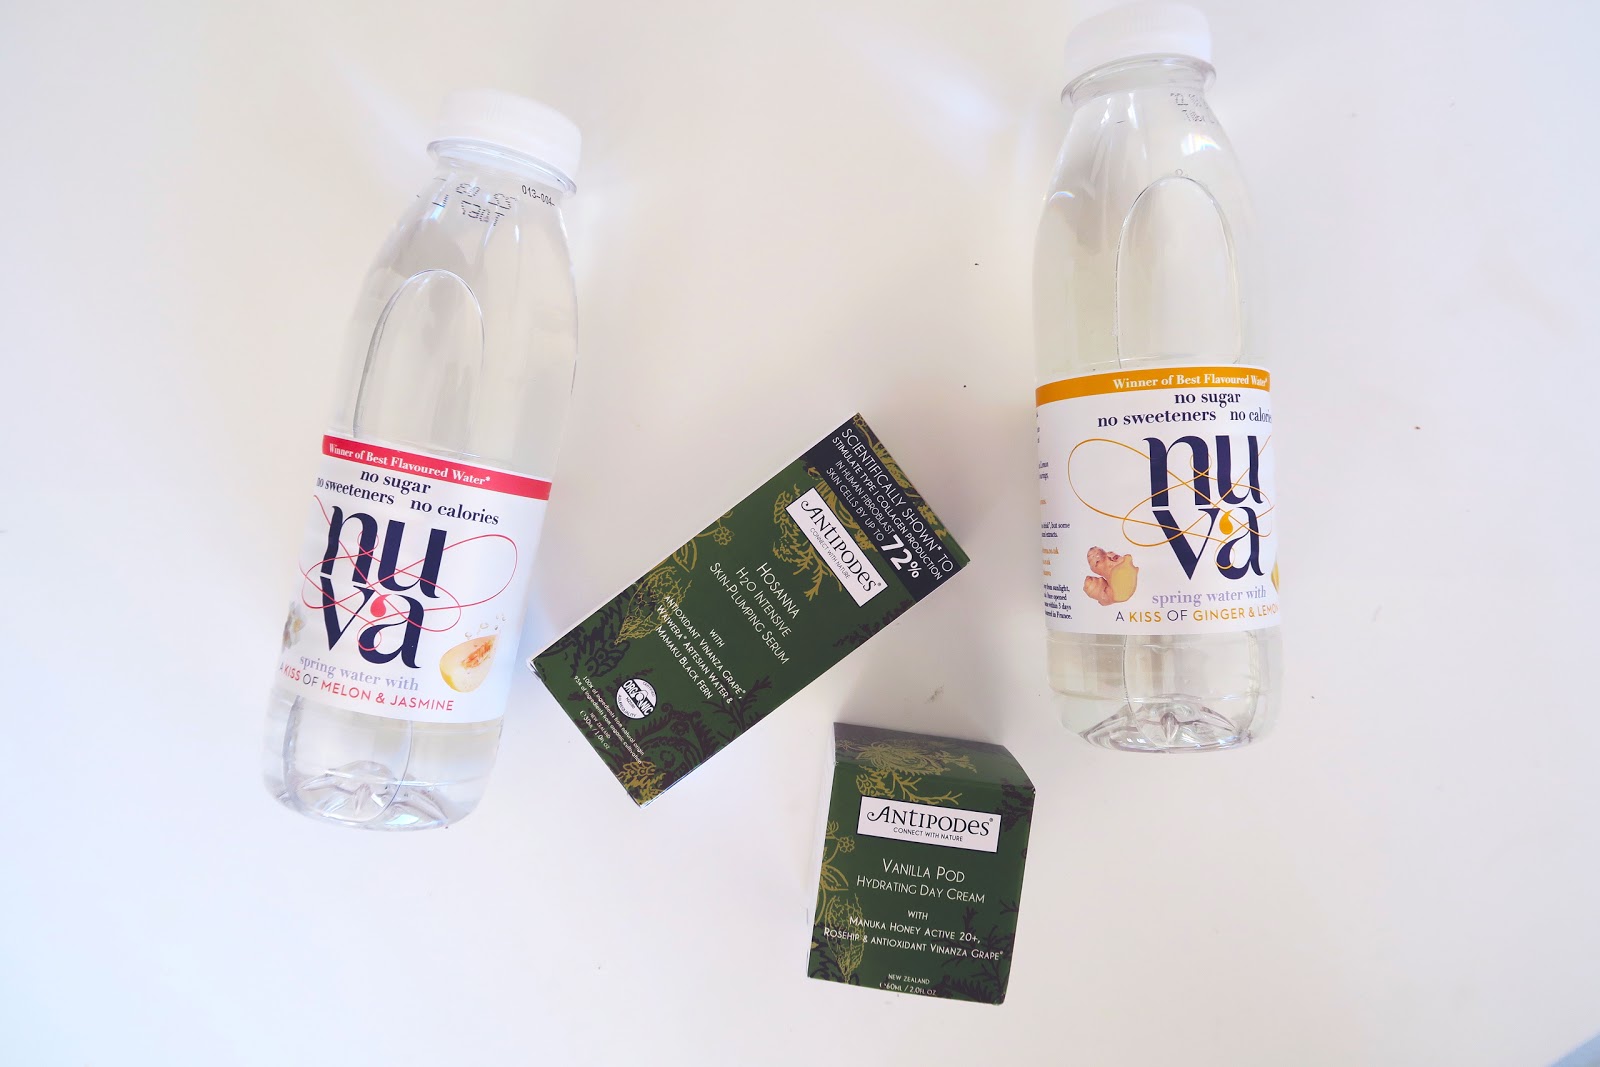 Keeping hydrated with Nuva and Antipodes